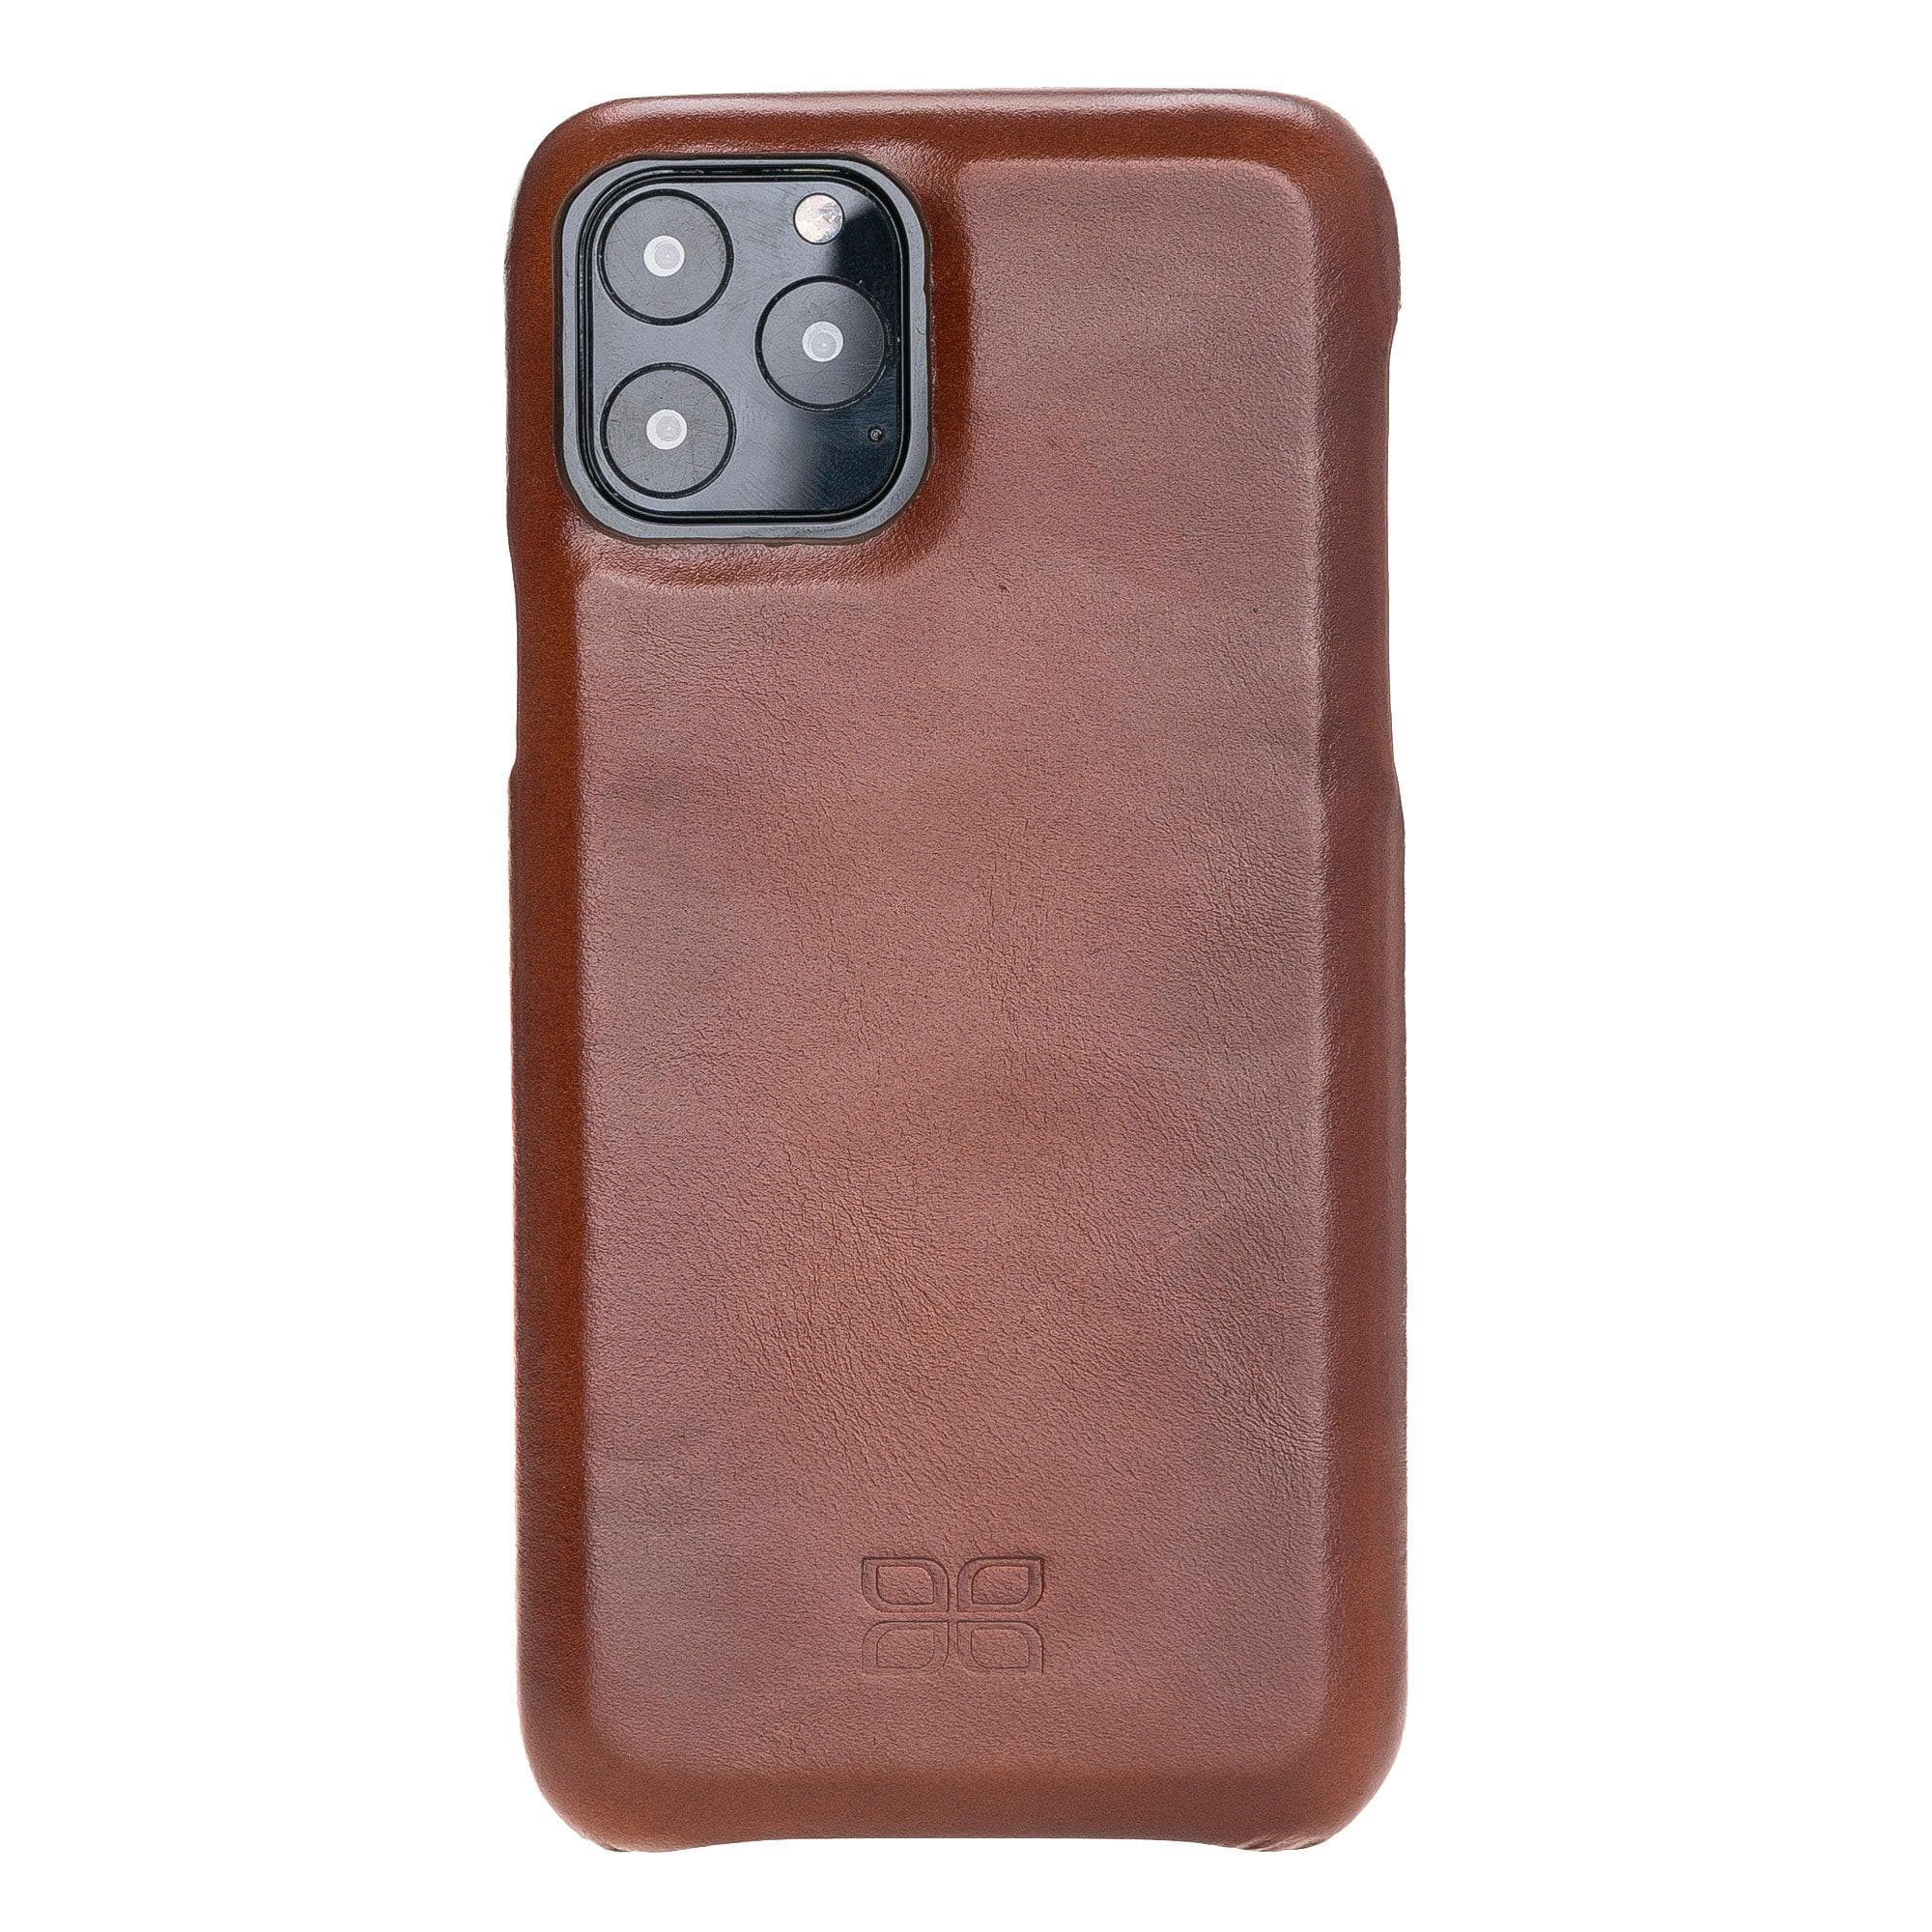 Bouletta Fully Leather Back Cover for Apple iPhone 11 Series iPhone 11 Pro / Tan Bouletta LTD